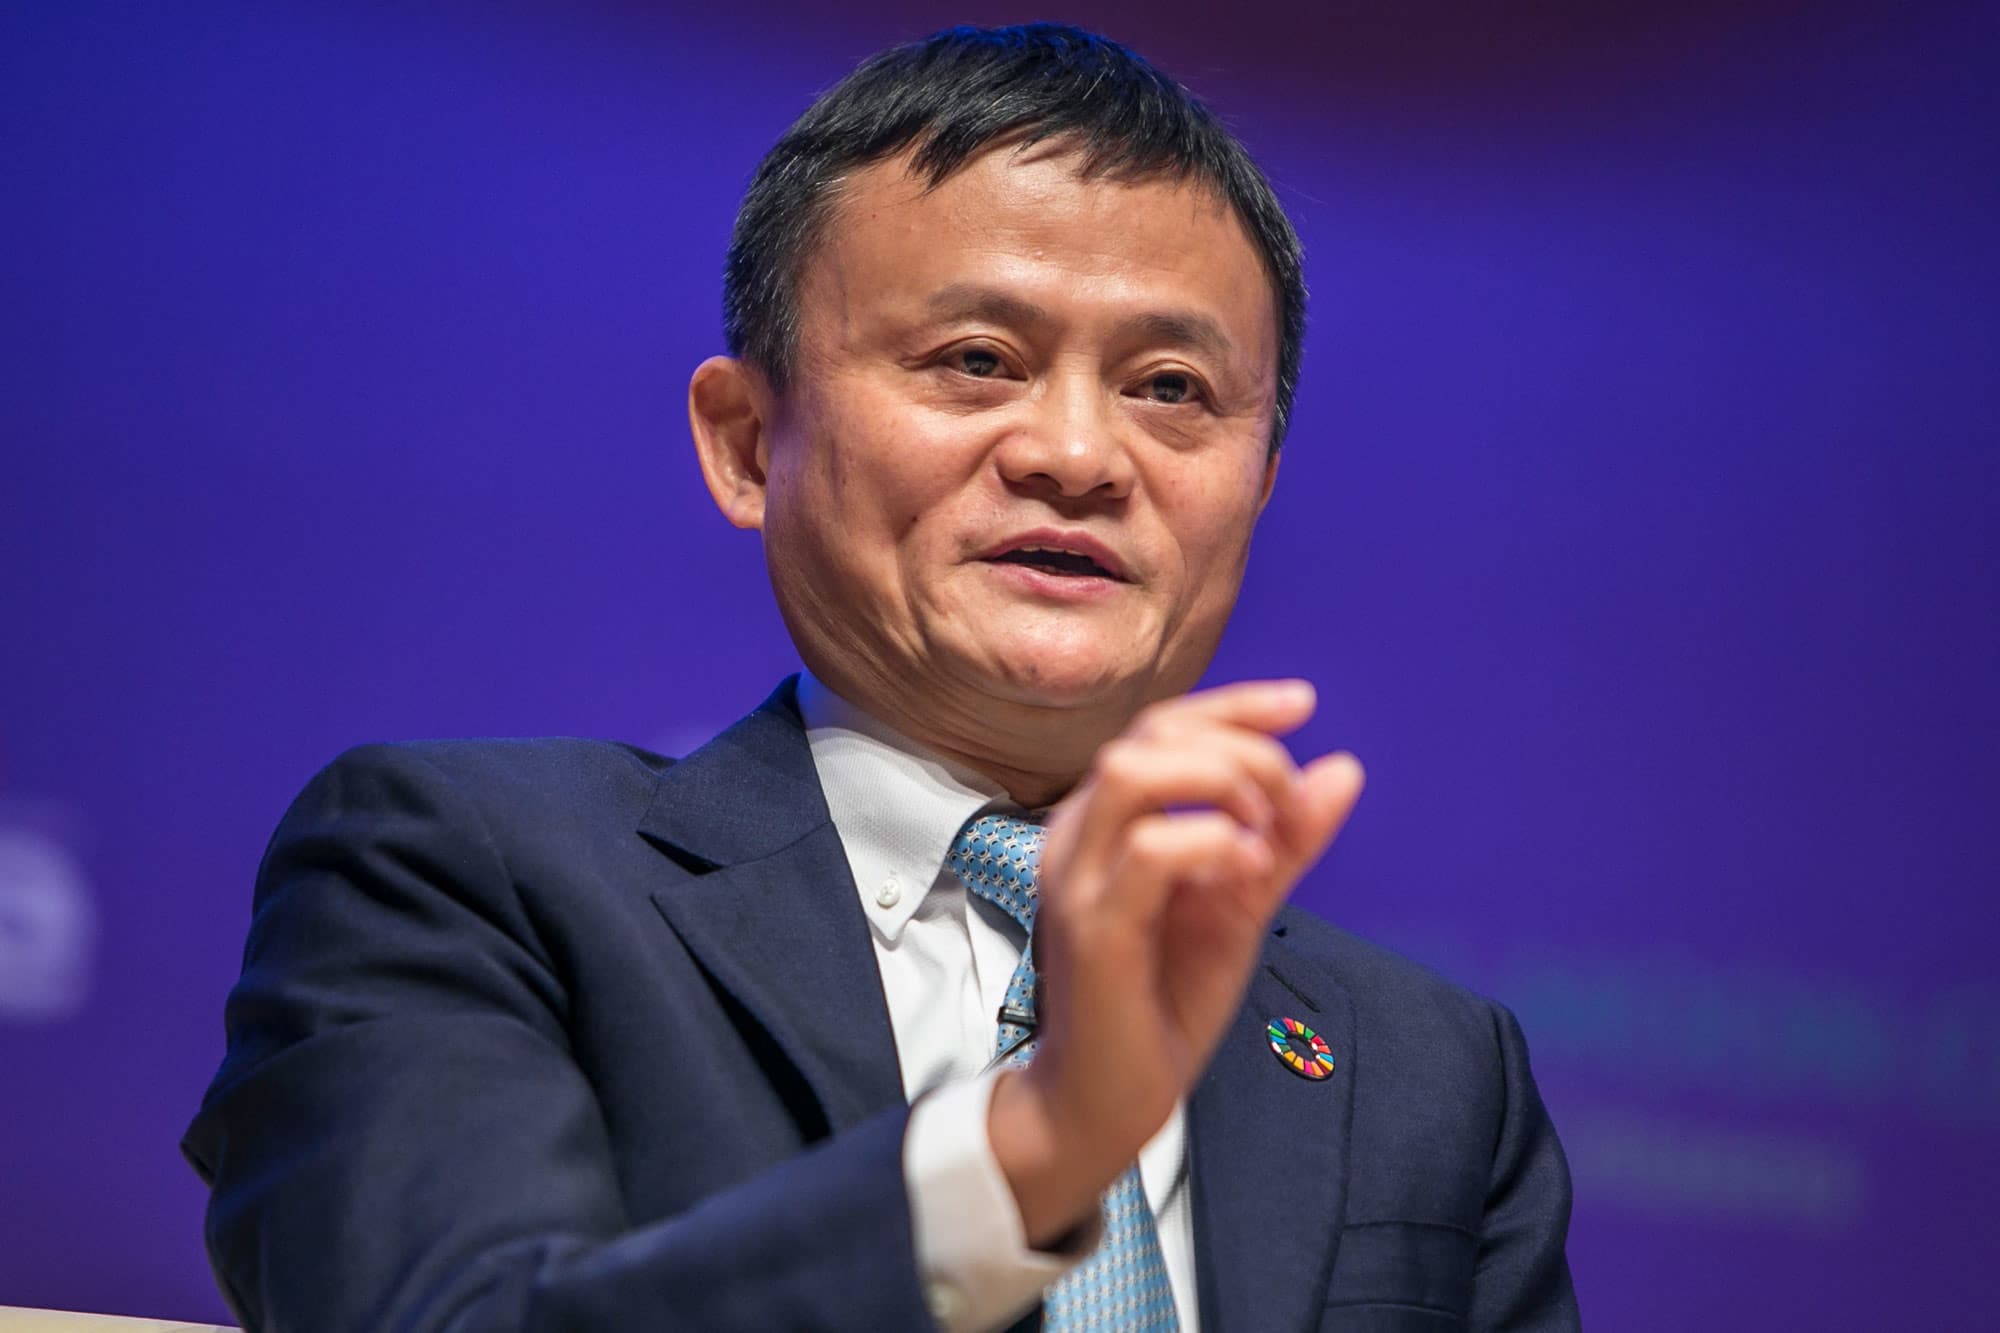 Alibaba founder Jack Ma is laying low for the time being, but he’s not missing, sources tell CNBC